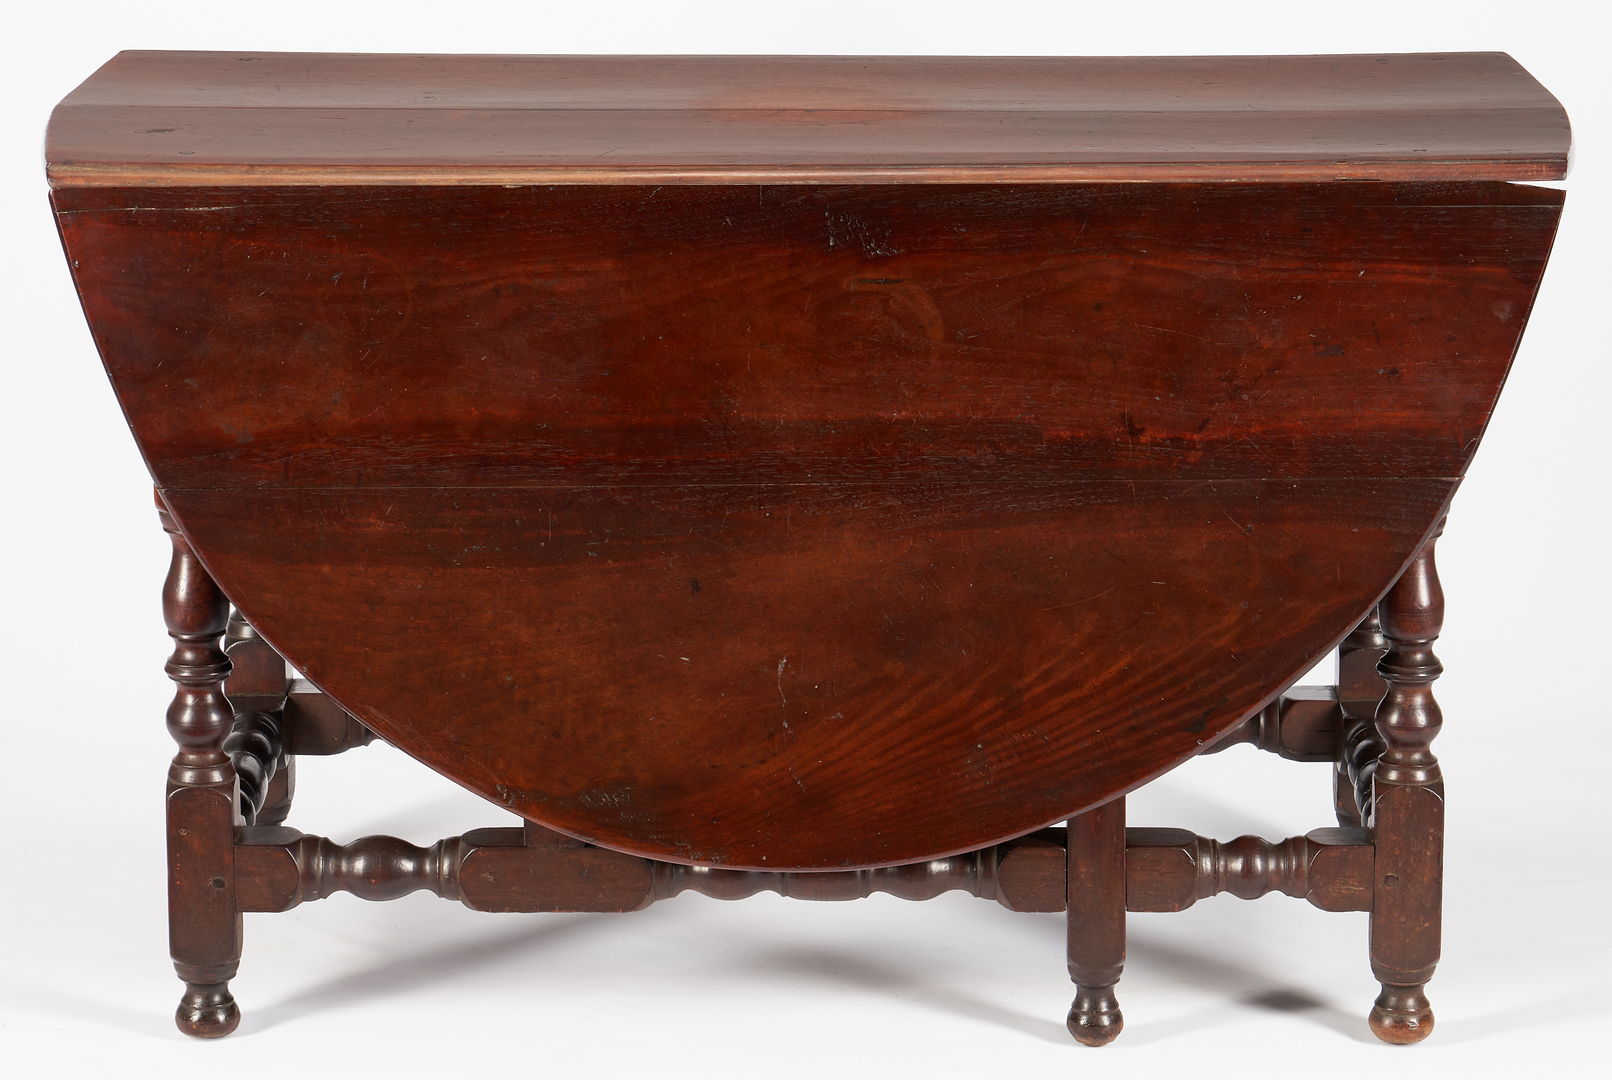 Lot 227: William and Mary Pennsylvania Two-Drawer Gateleg Table